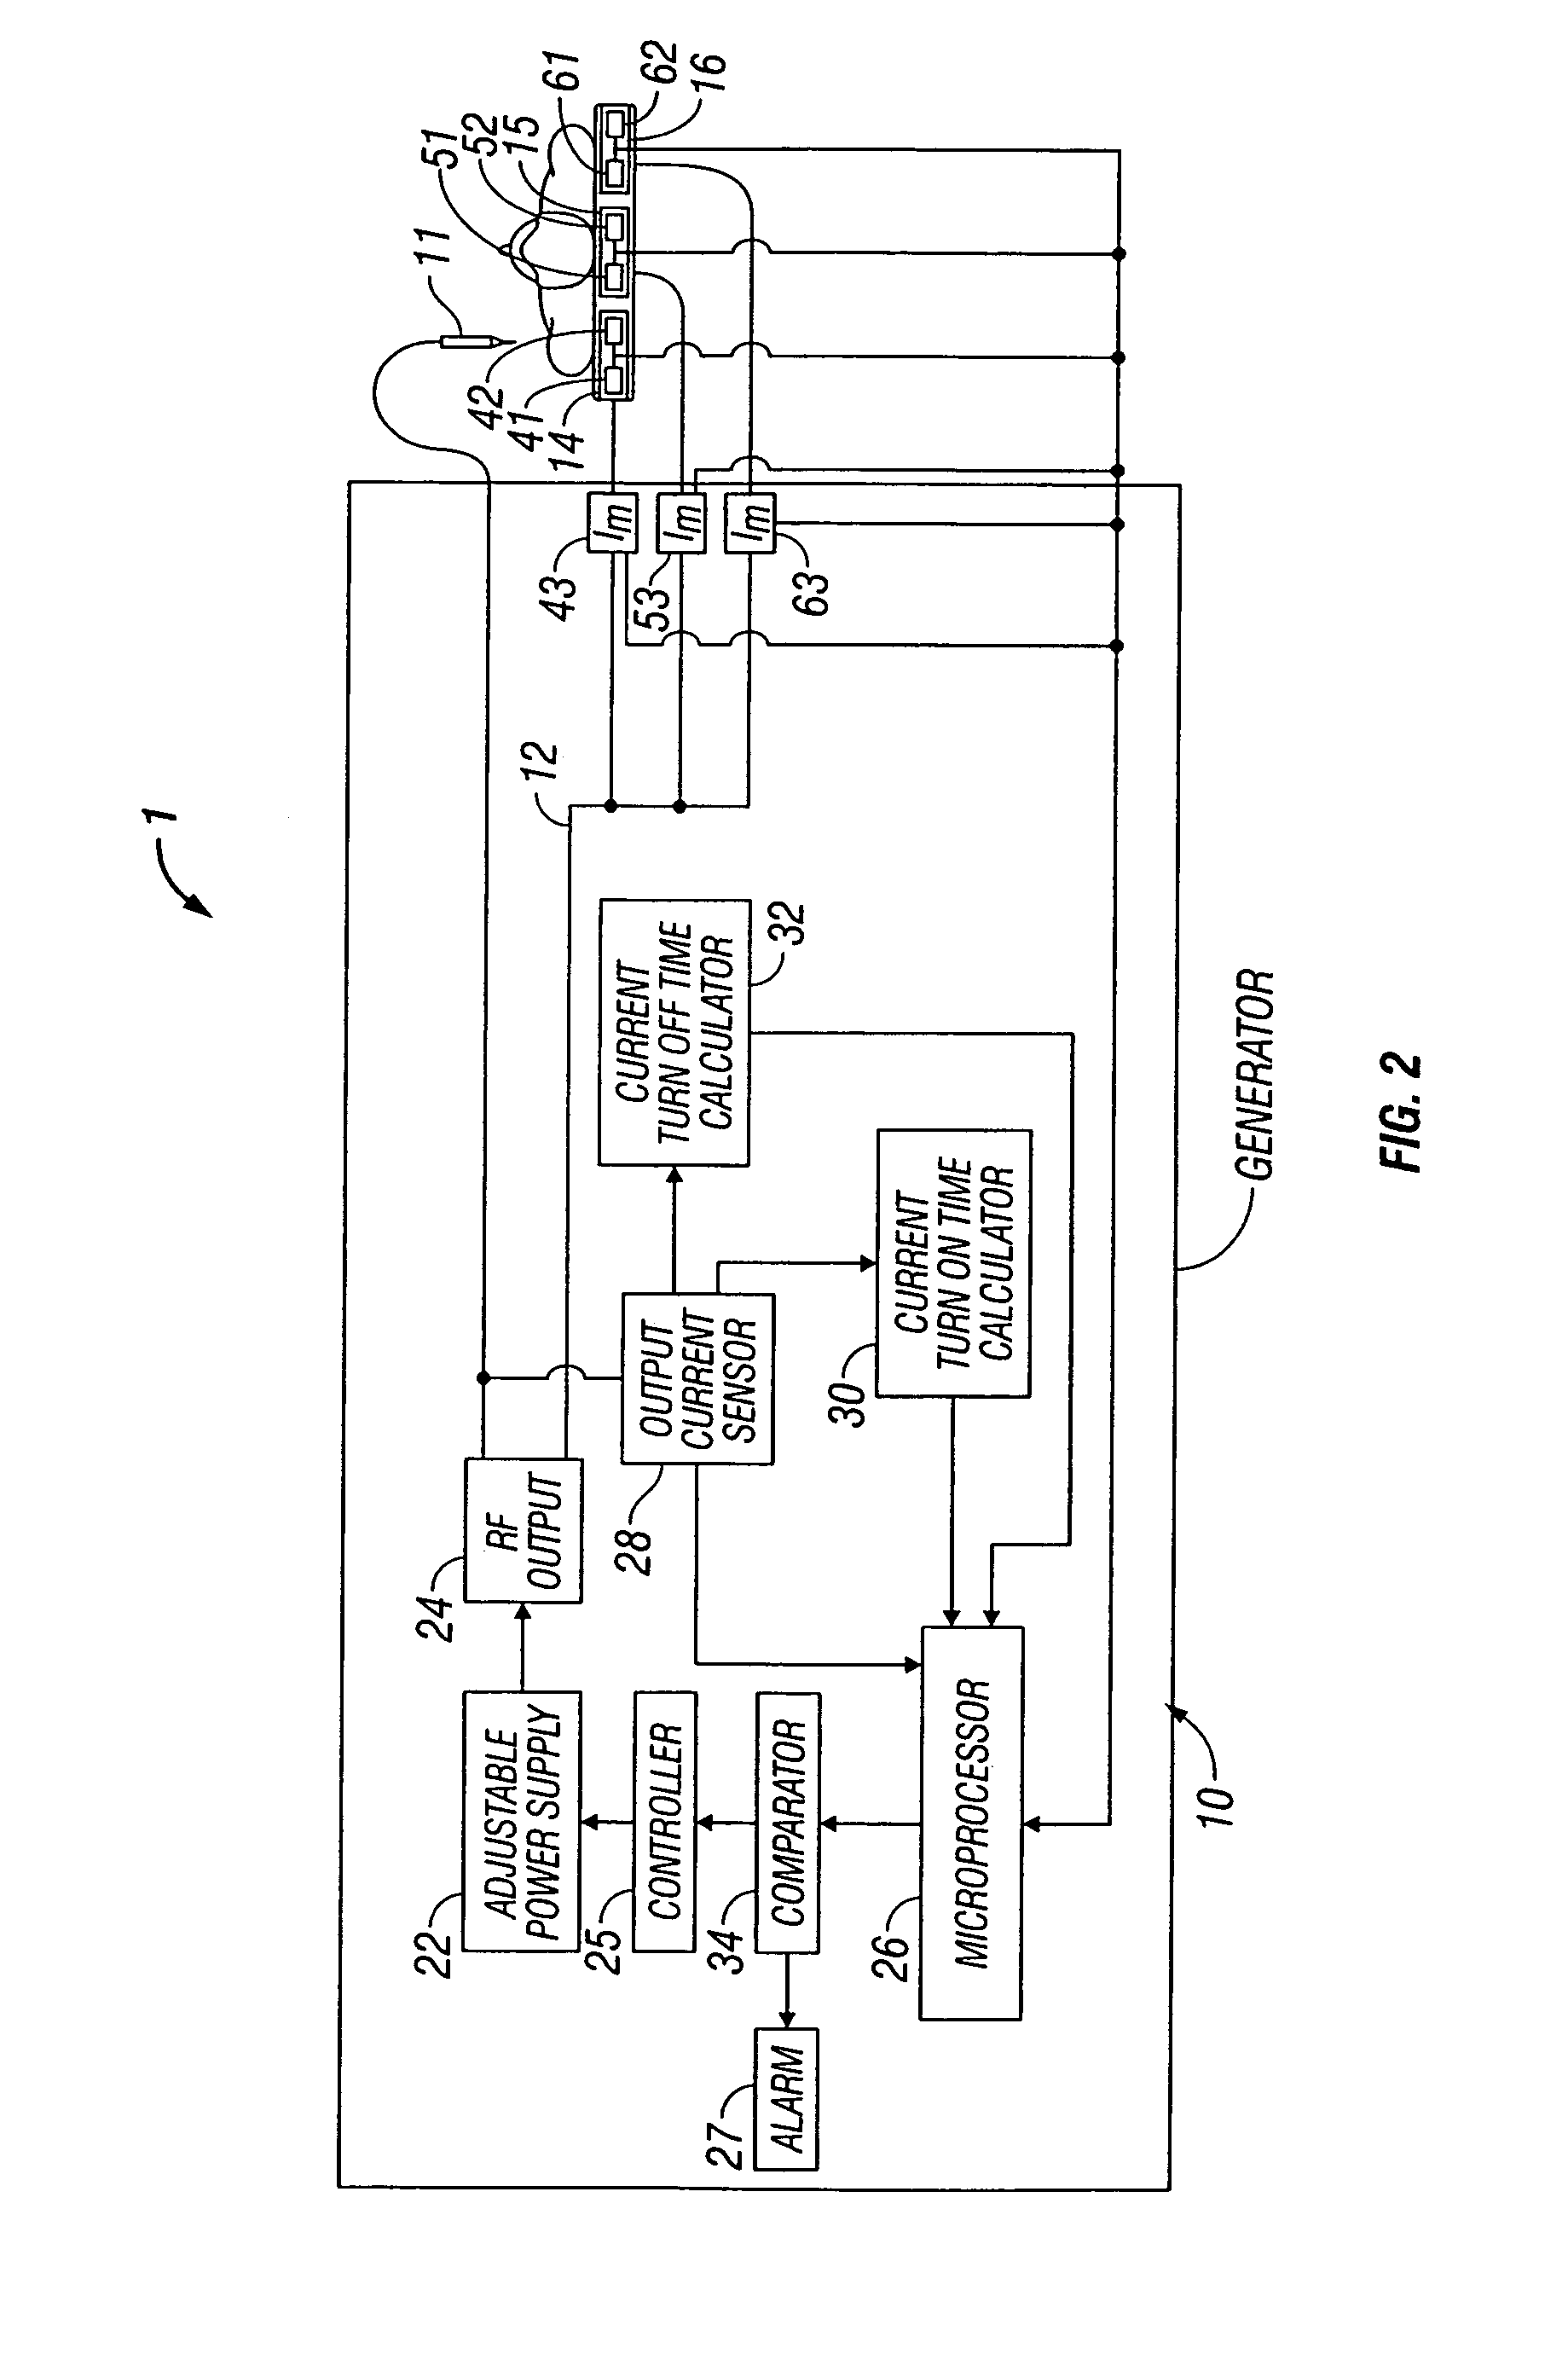 System and method for return electrode monitoring